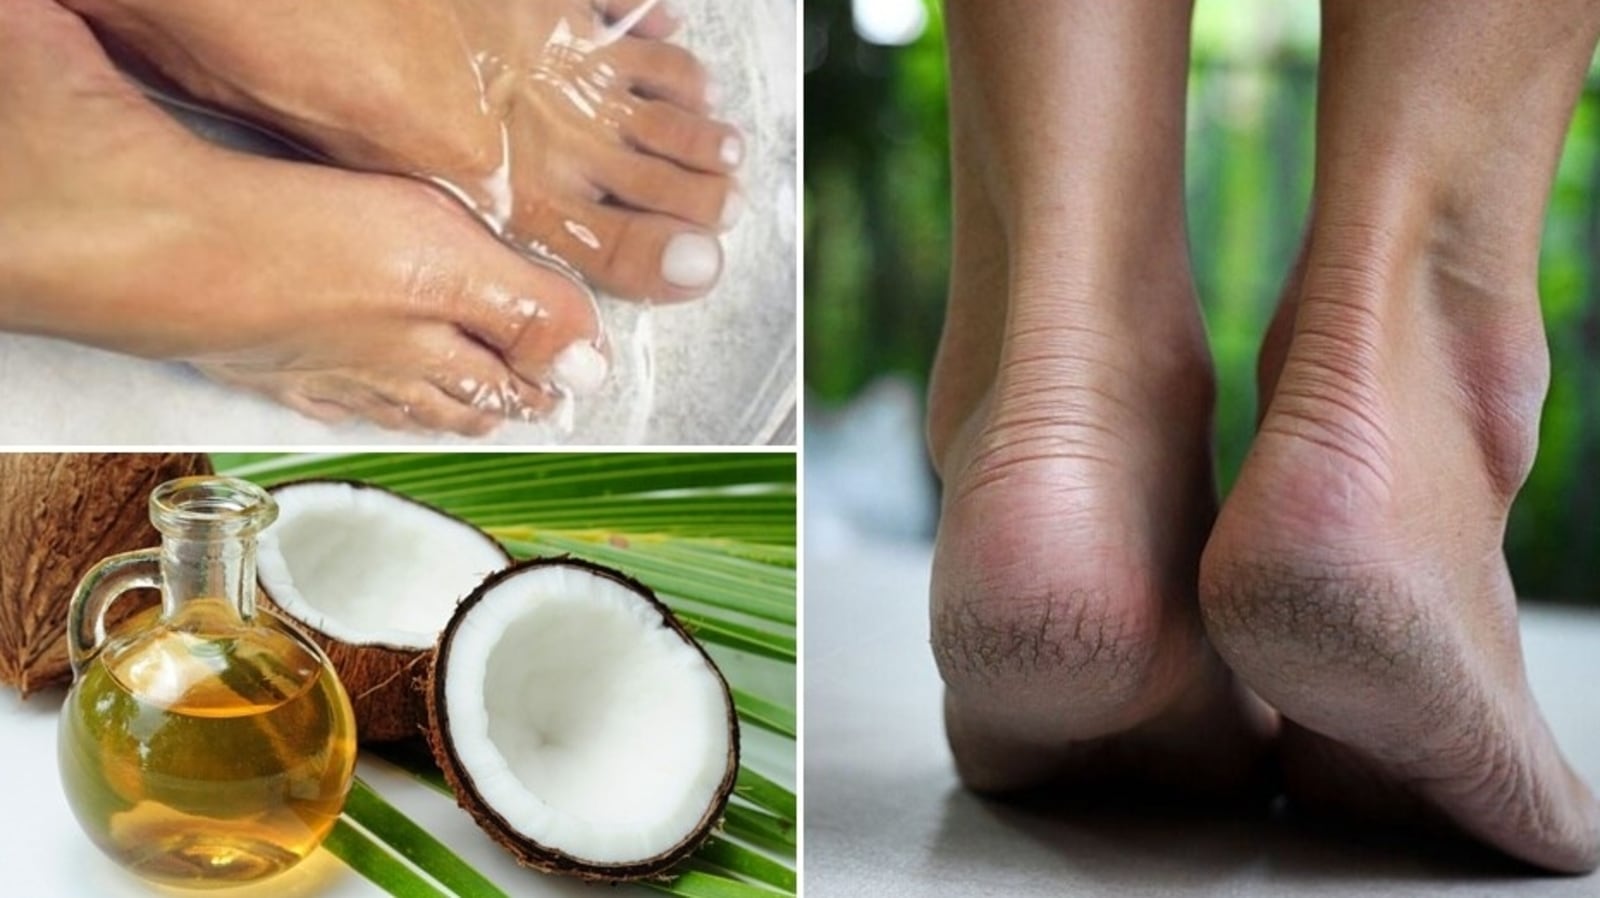 Tired of Cracked Heels? Cure it With These Home Remedies